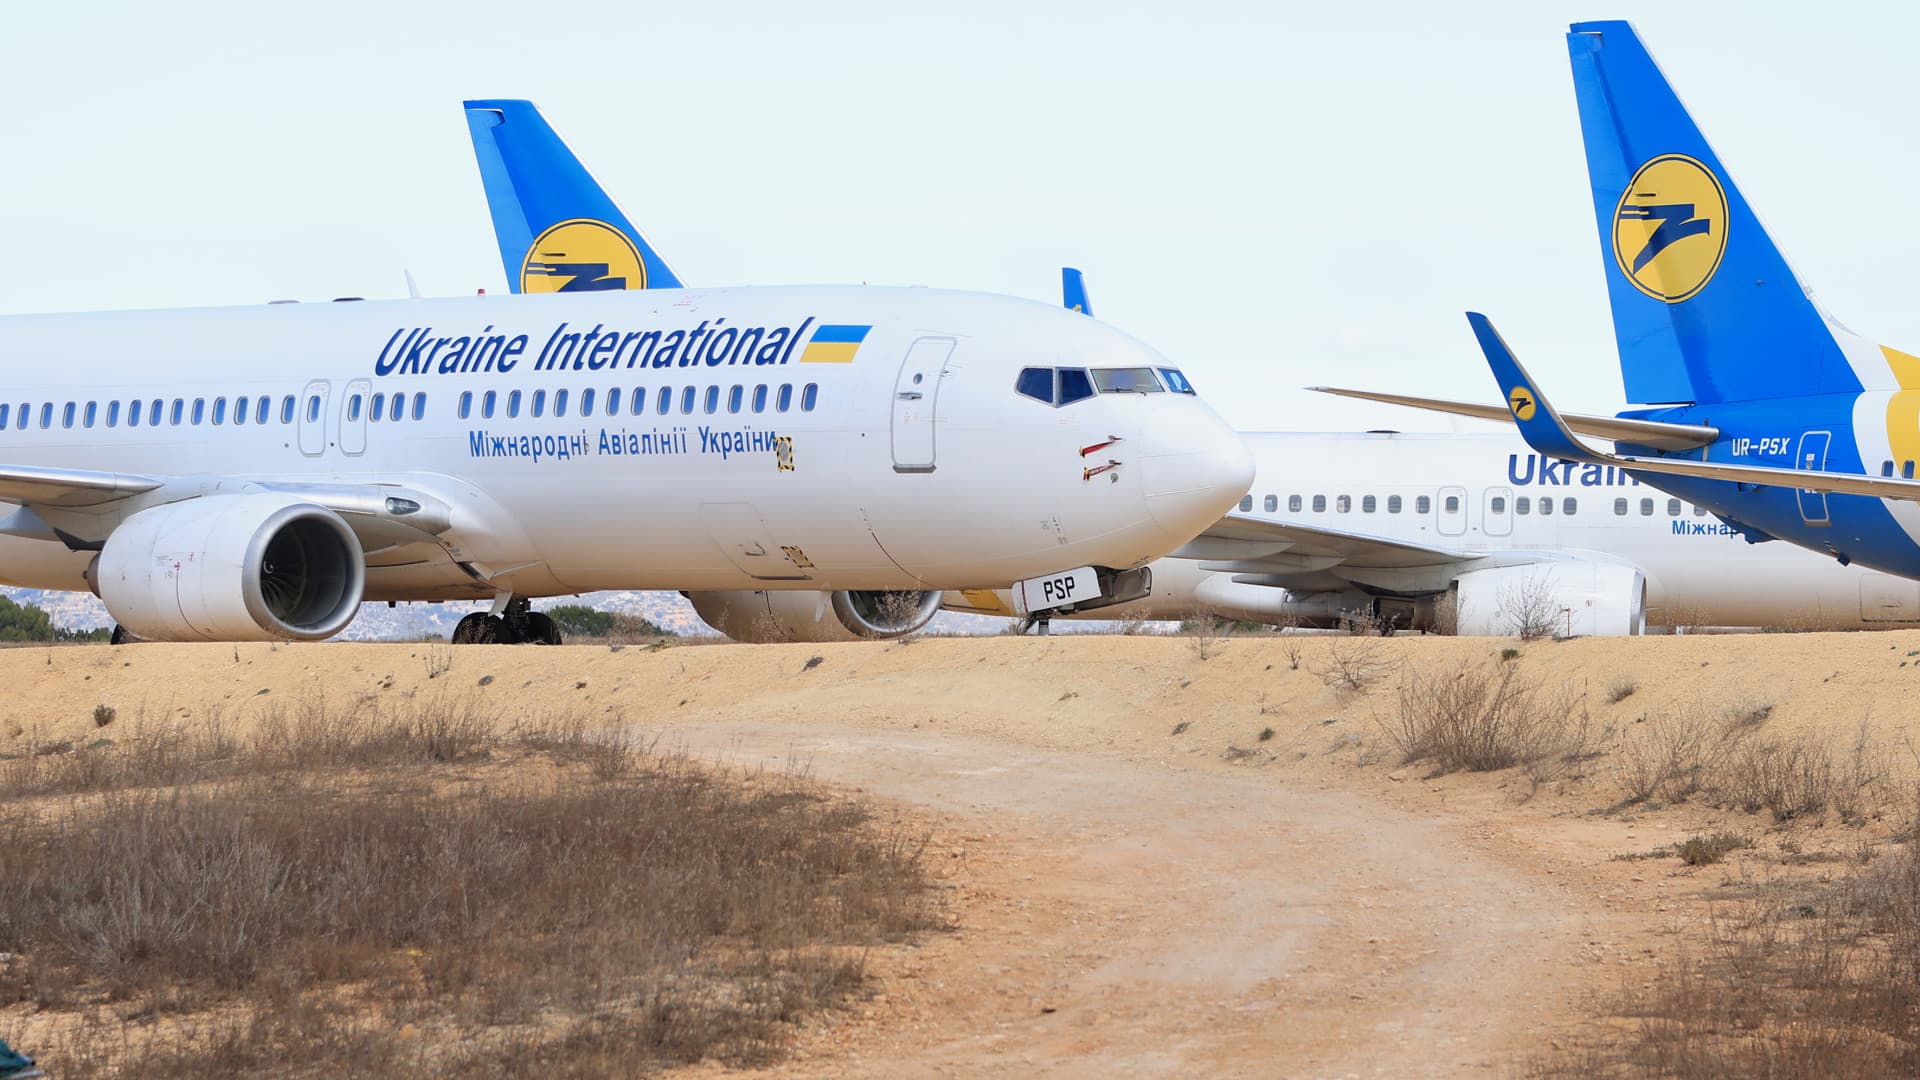 One of the five Ukrainian Boeign 737-800 aircraft that landed yesterday at Castellon airport in the face of the political situation in Ukraine and Russia, on 15 February, 2022 in Castellon, Valencian Community, Spain.